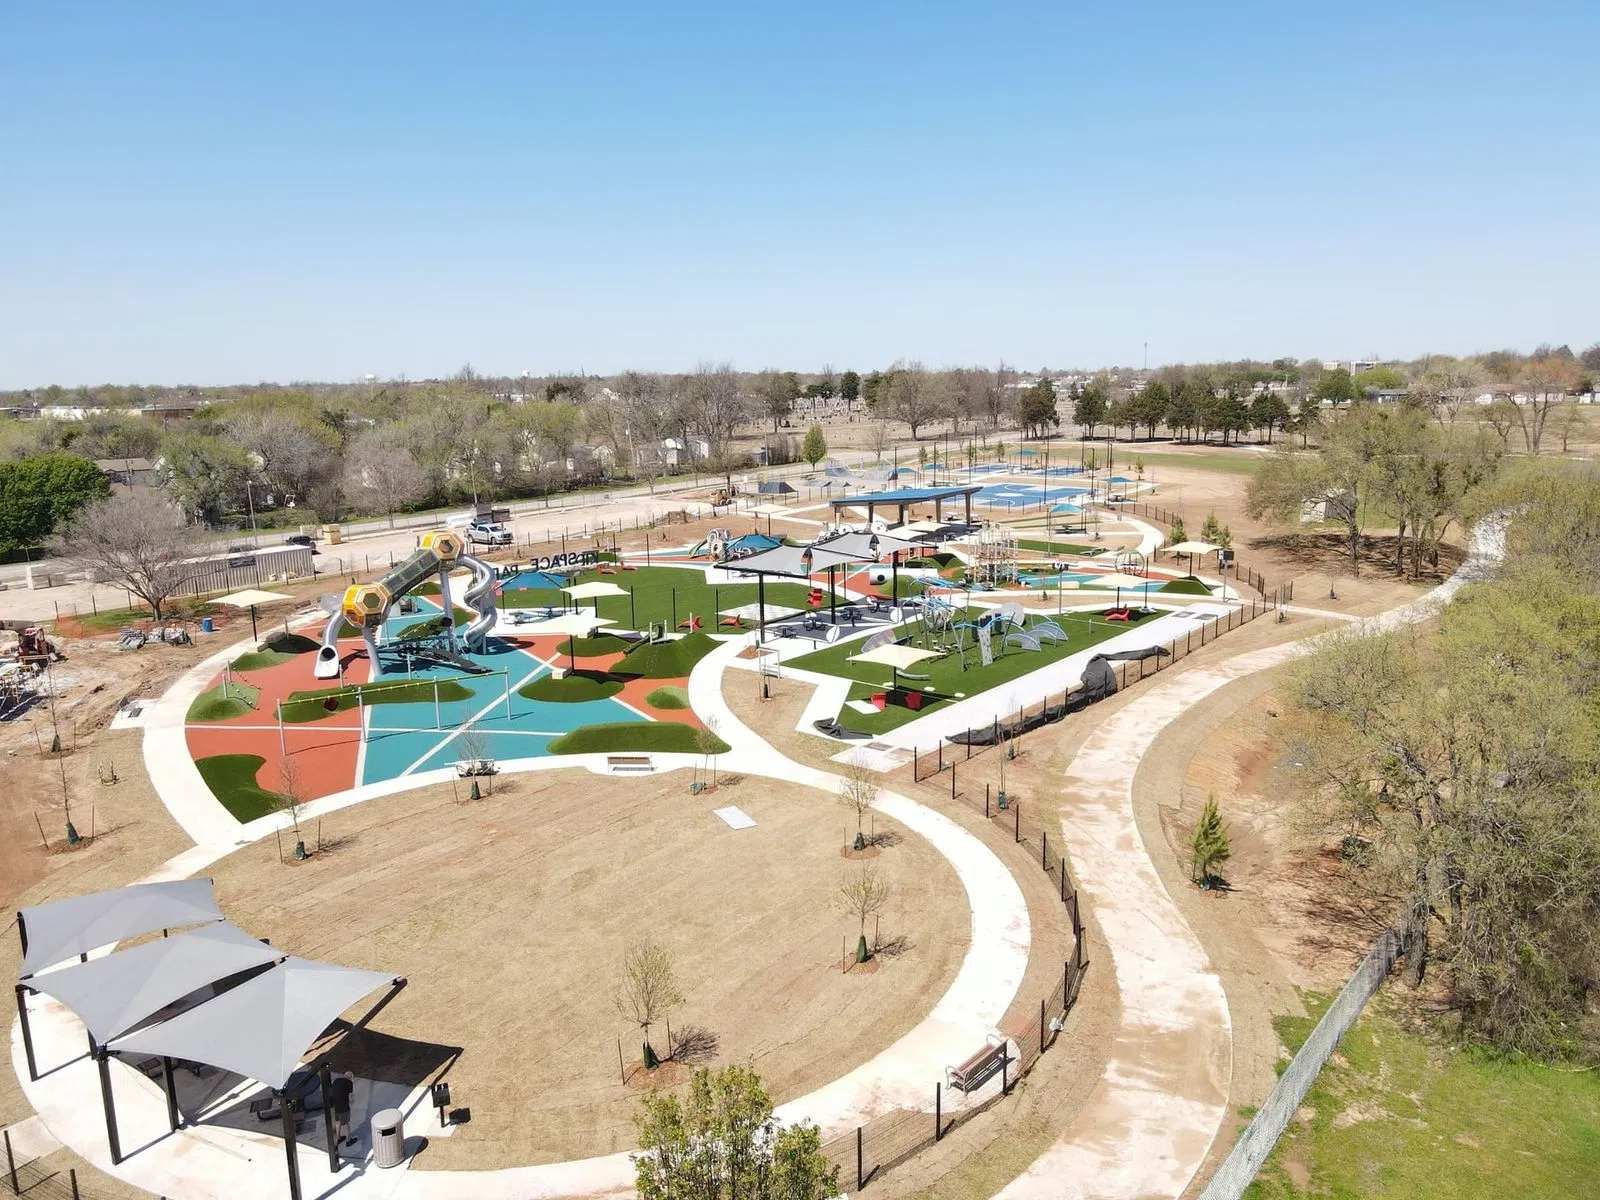 KidSpace Park, One of the Largest Playgrounds in Oklahoma, Opening in Shawnee